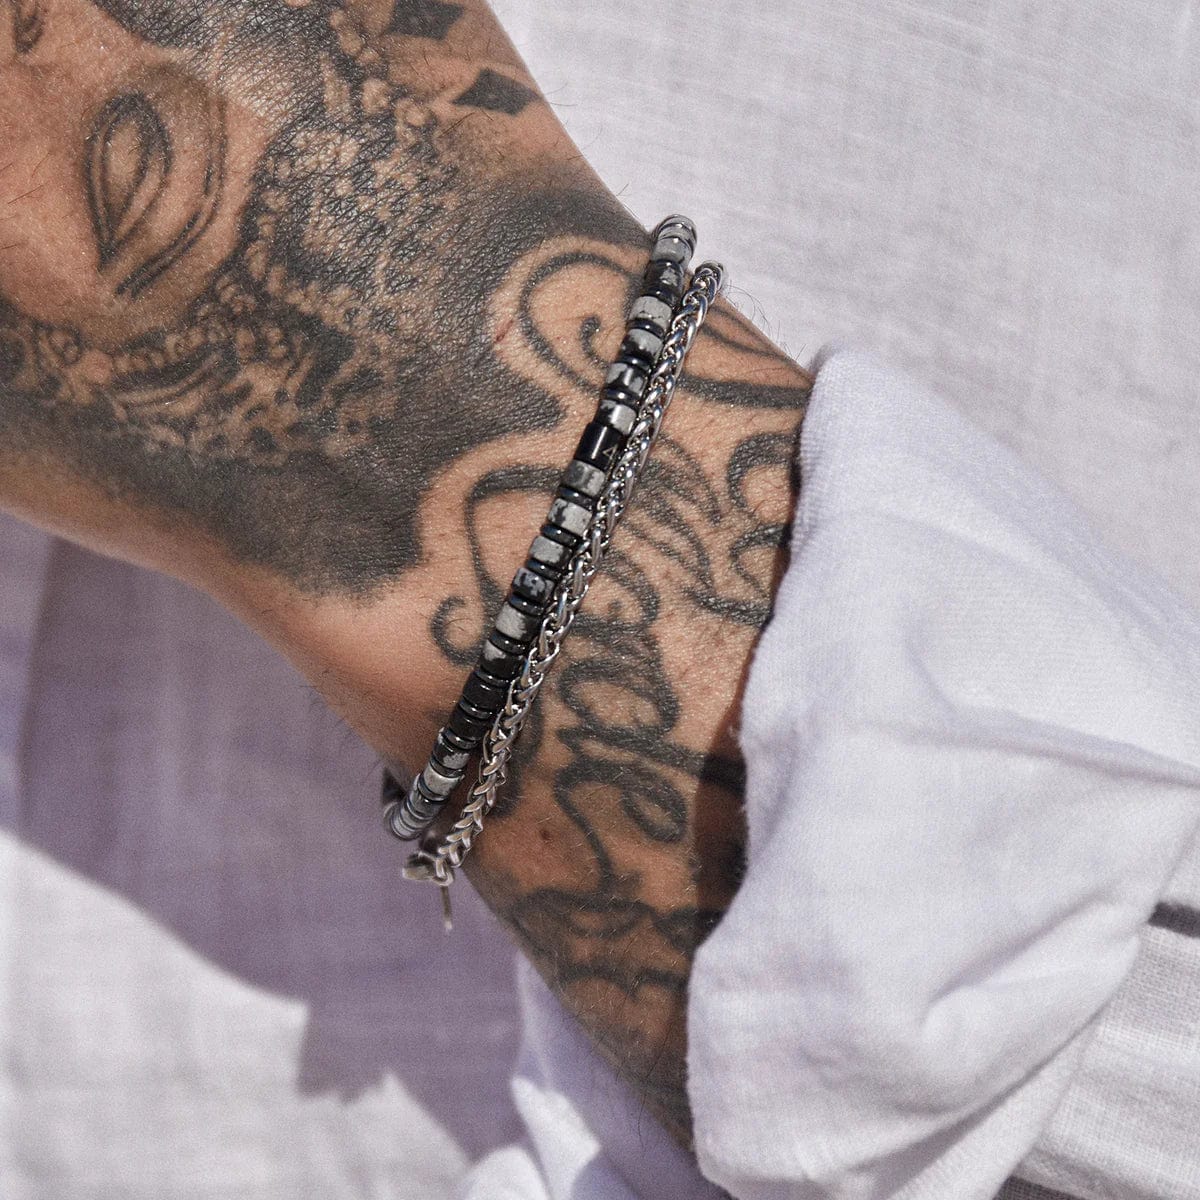 Scout - Mens Bracelet by Arms of Eve